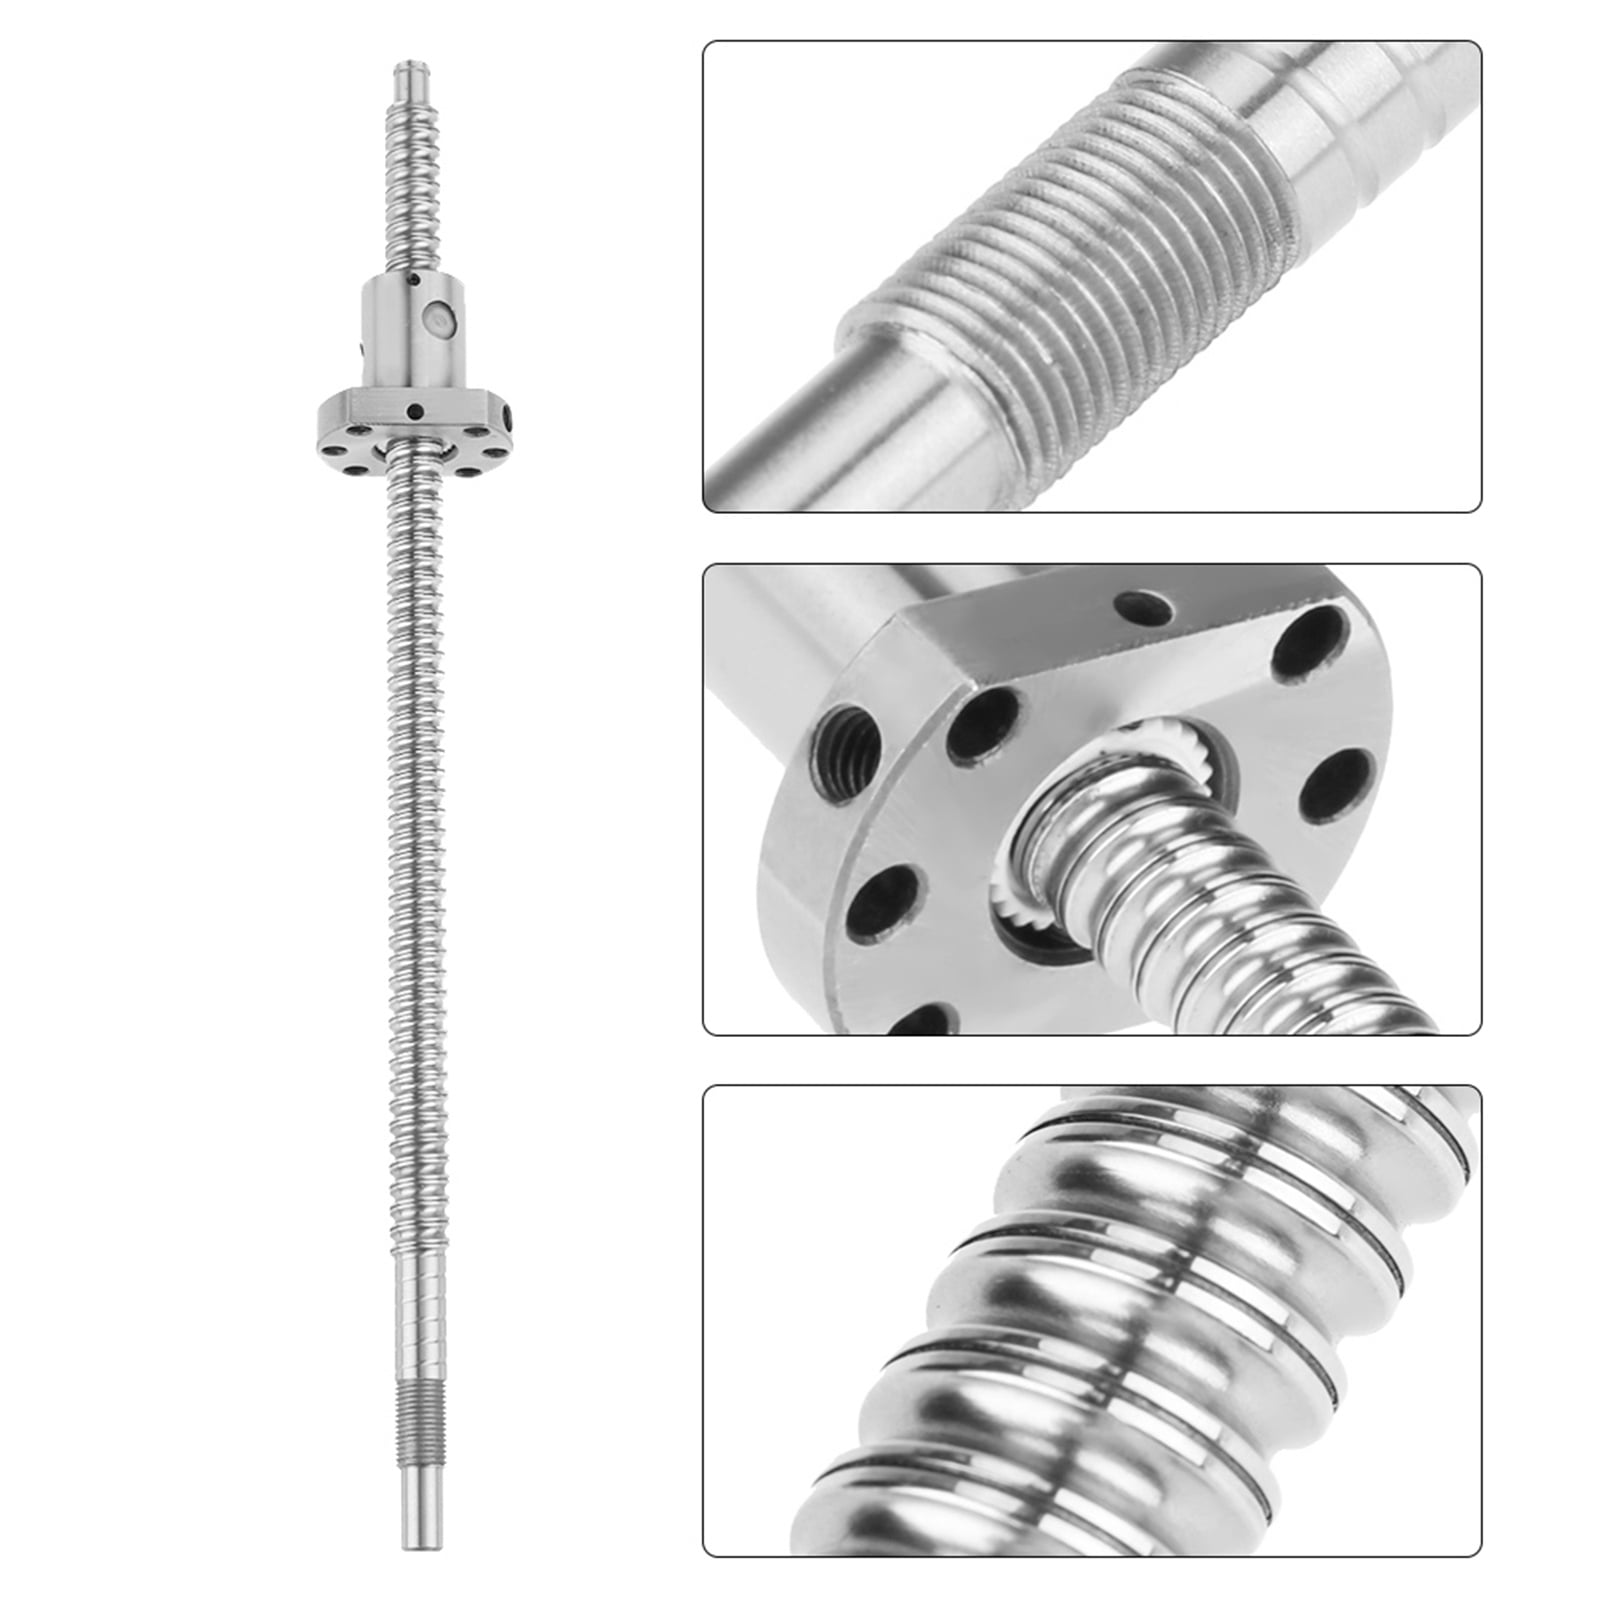 SFU1204 Ballscrew 300mm Rolled Ballscrew Ballnut Anti‑Backlash Without Side End Supports Used The Ball Movement 